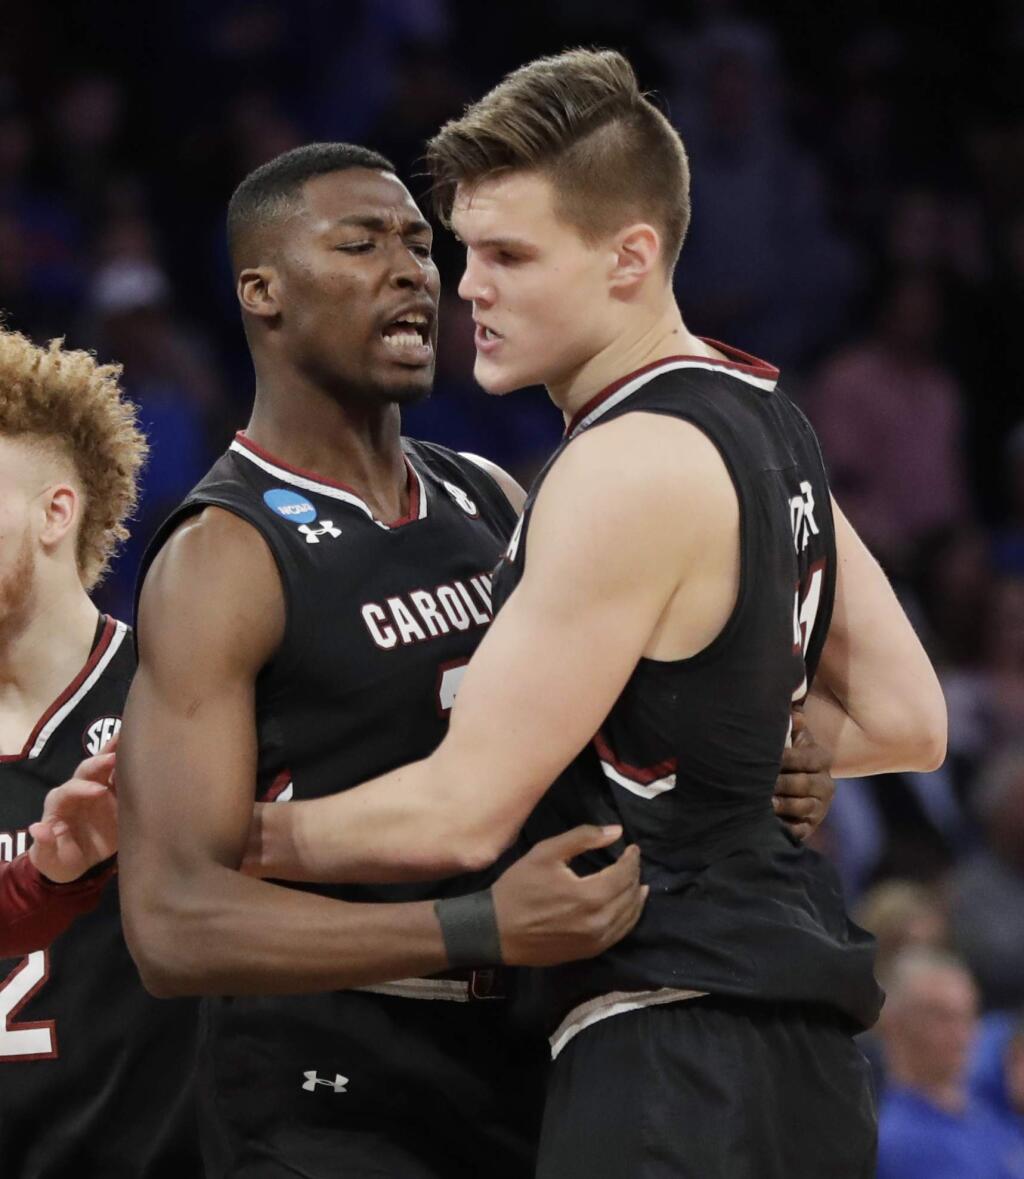 South Carolina forward Sedee Keita, left, congratulates forward Maik Kotsar (21) after Kotsar scored against Florida during the second half of the East Regional championship game of the NCAA men's college basketball tournament, Sunday, March 26, 2017, in New York. (AP Photo/Julio Cortez)